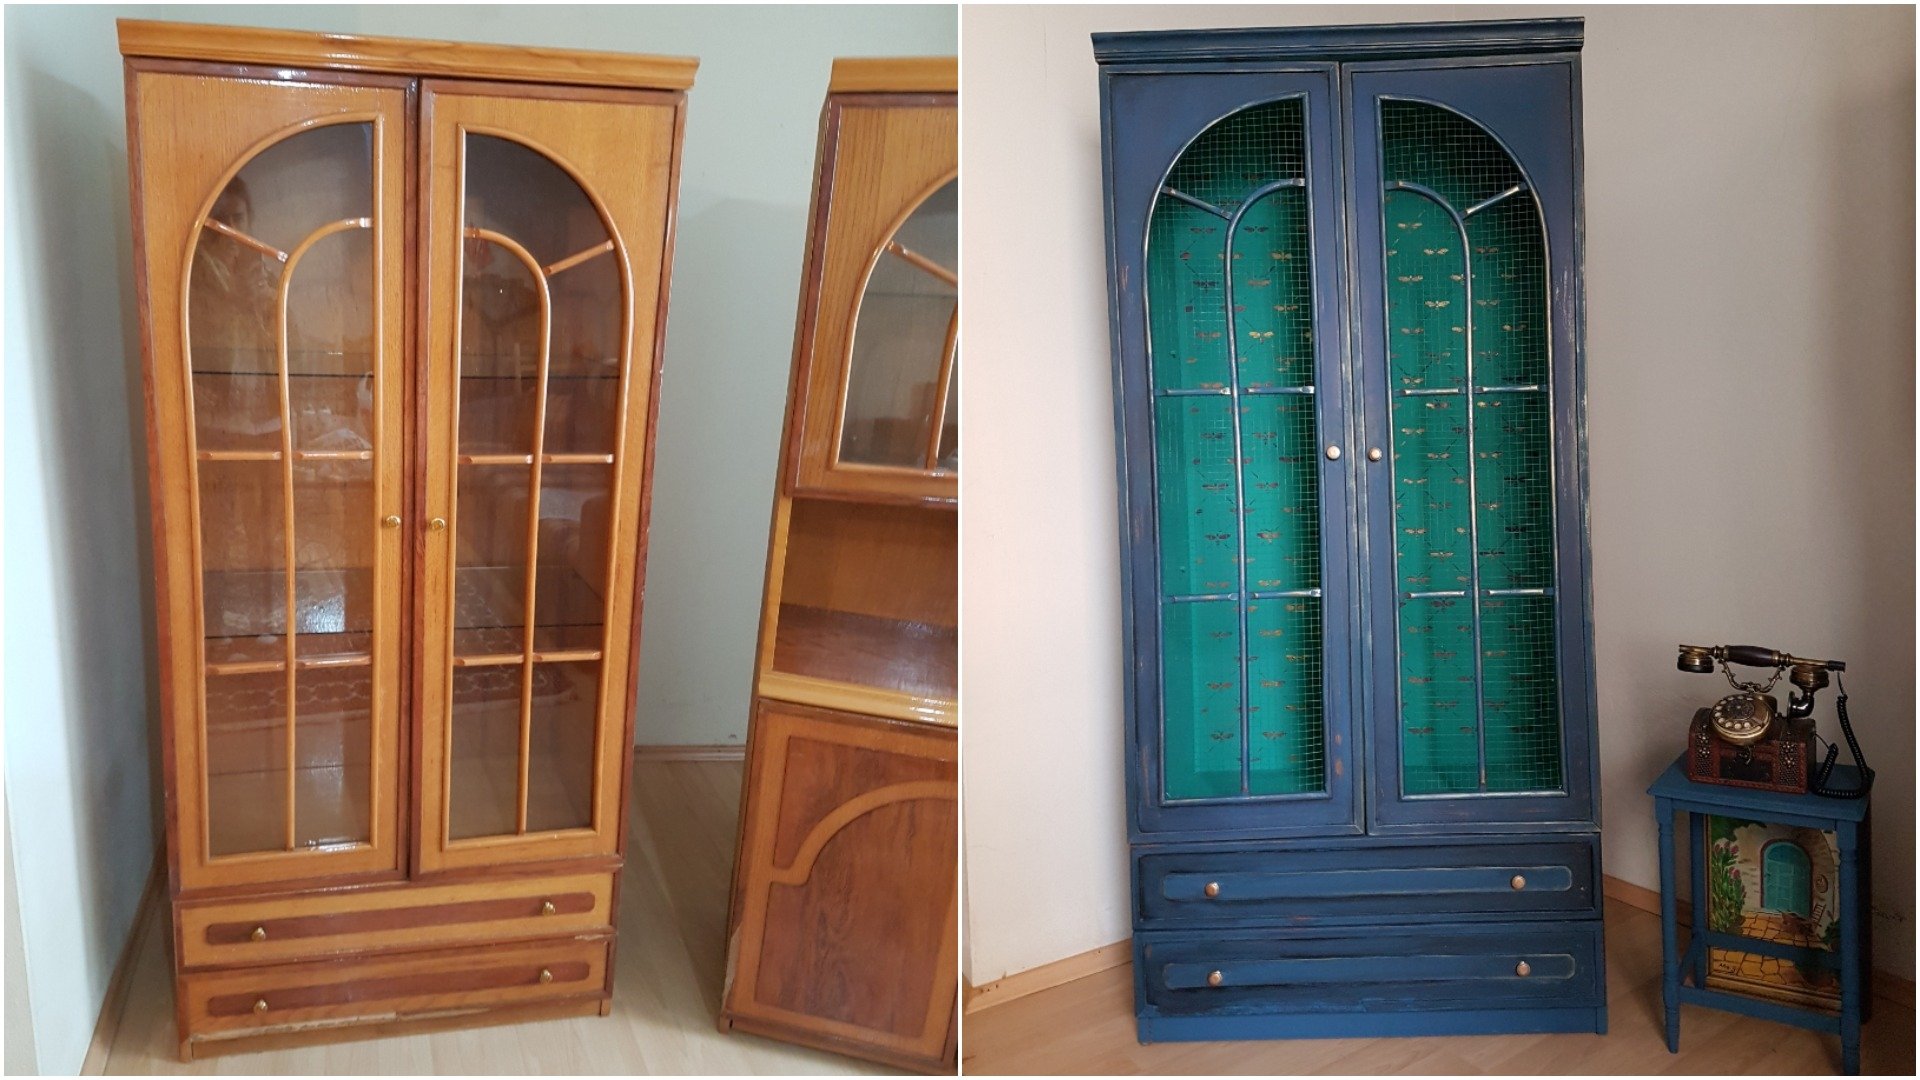 A before and after collage of pictures shows a wardrobe renovation project. (Photos courtesy of Tacihan Yongacı)